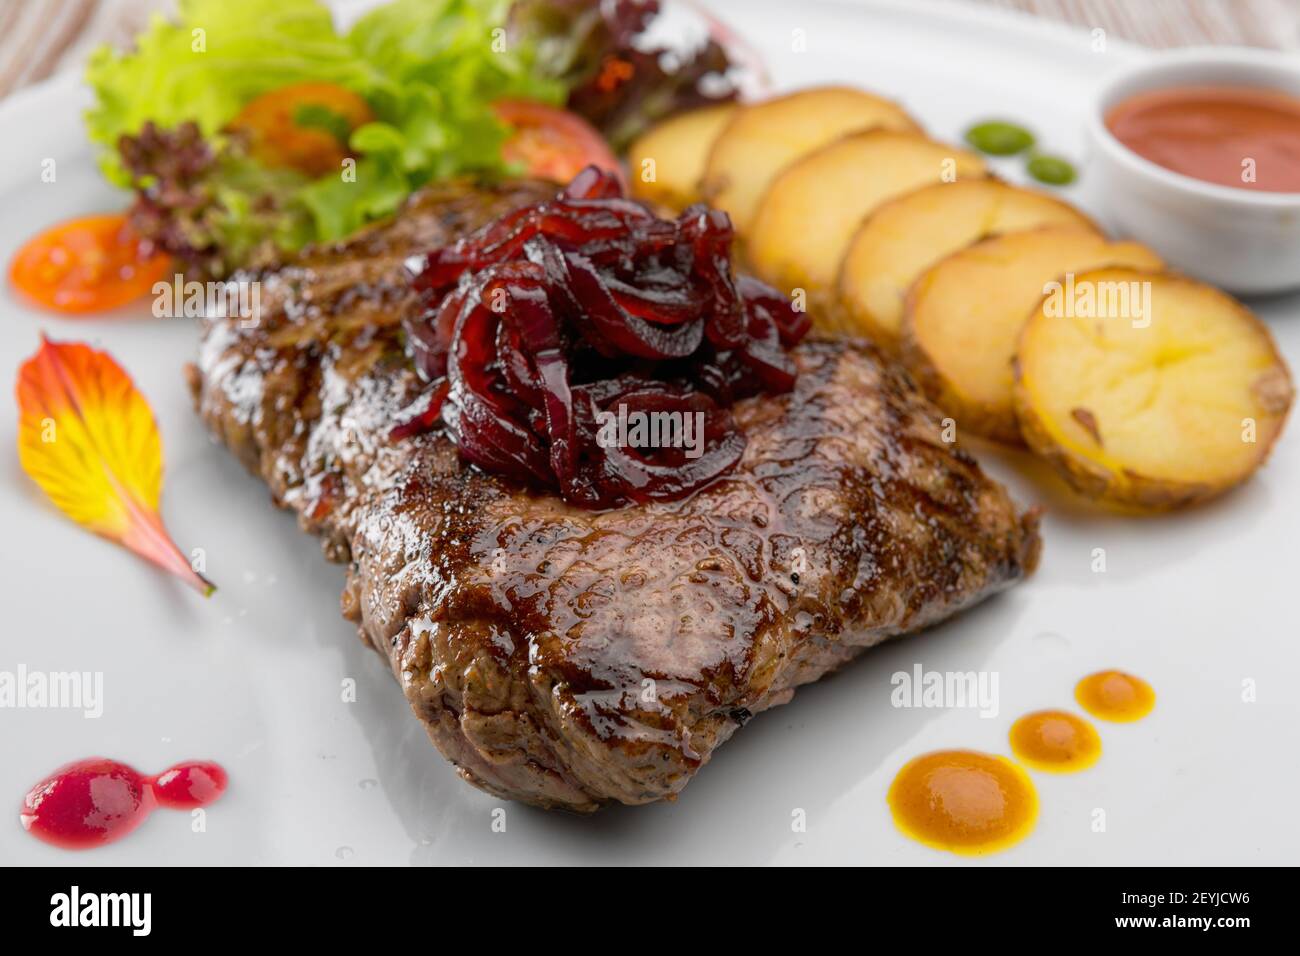 Meat Steak with potatoes on a white plate Stock Photo